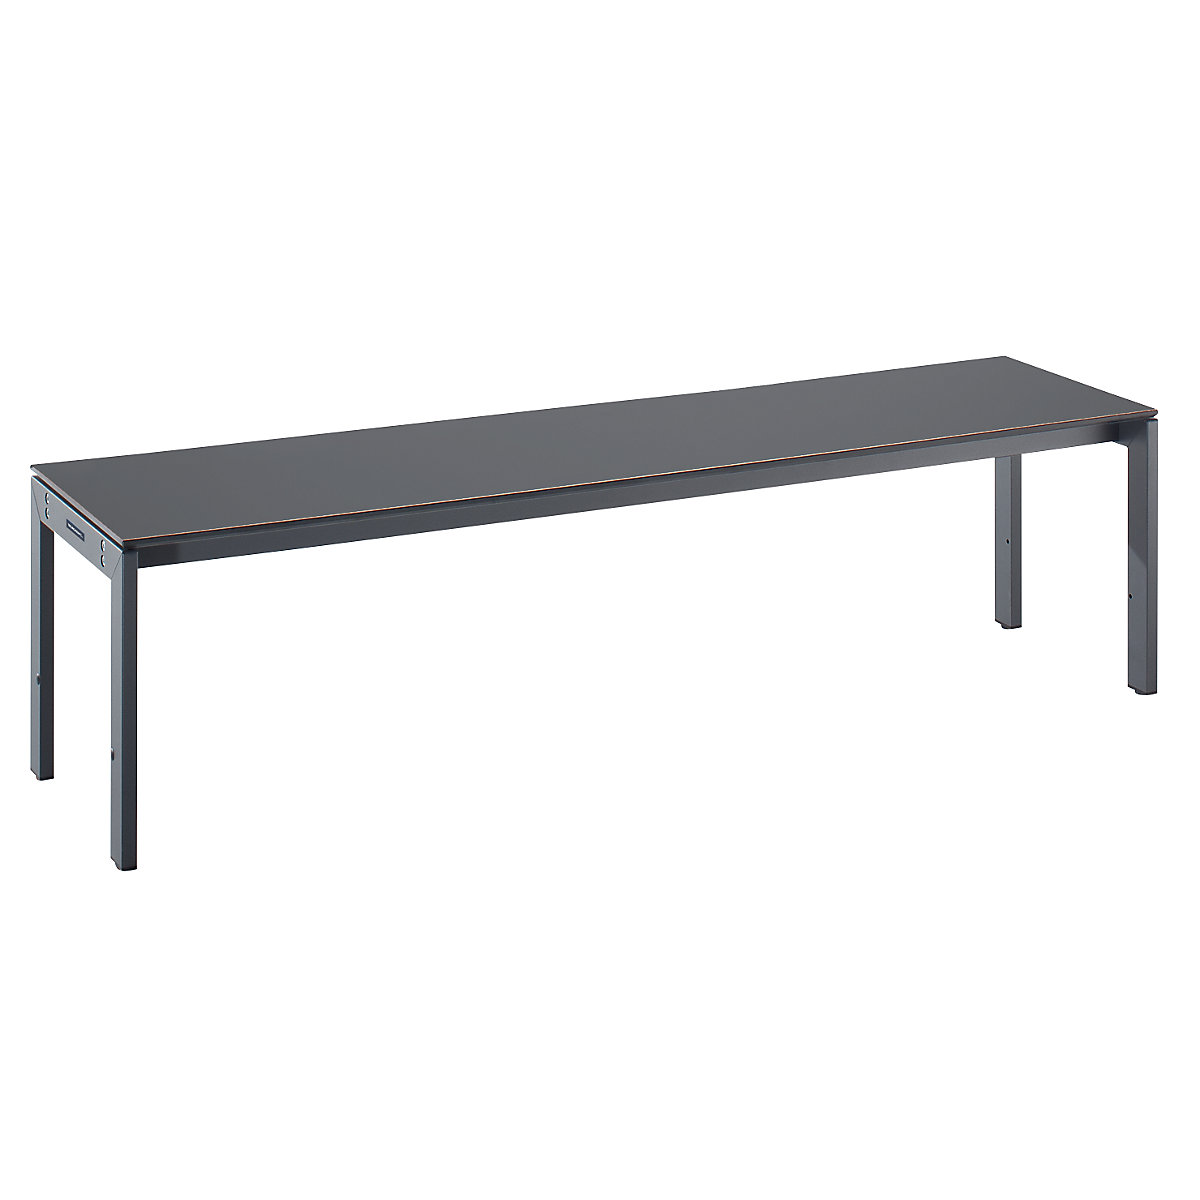 Changing room bench with steel frame – eurokraft pro, LxHxD 1500 x 415 x 400 mm, basalt grey seat-6